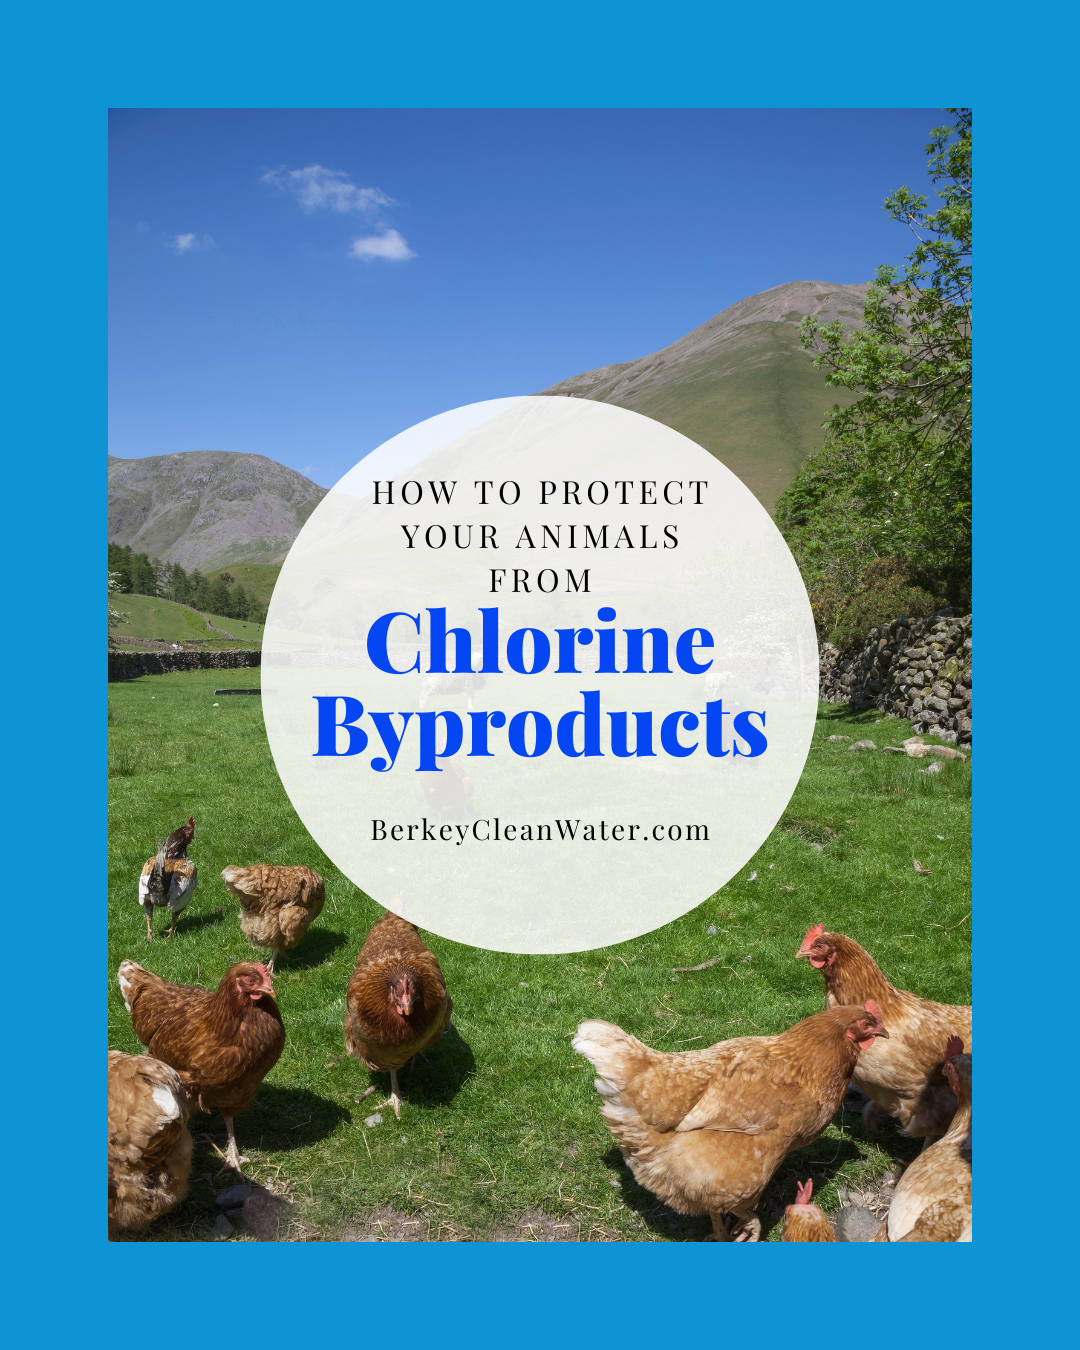 Chlorine Byproducts and Protecting Your Animals